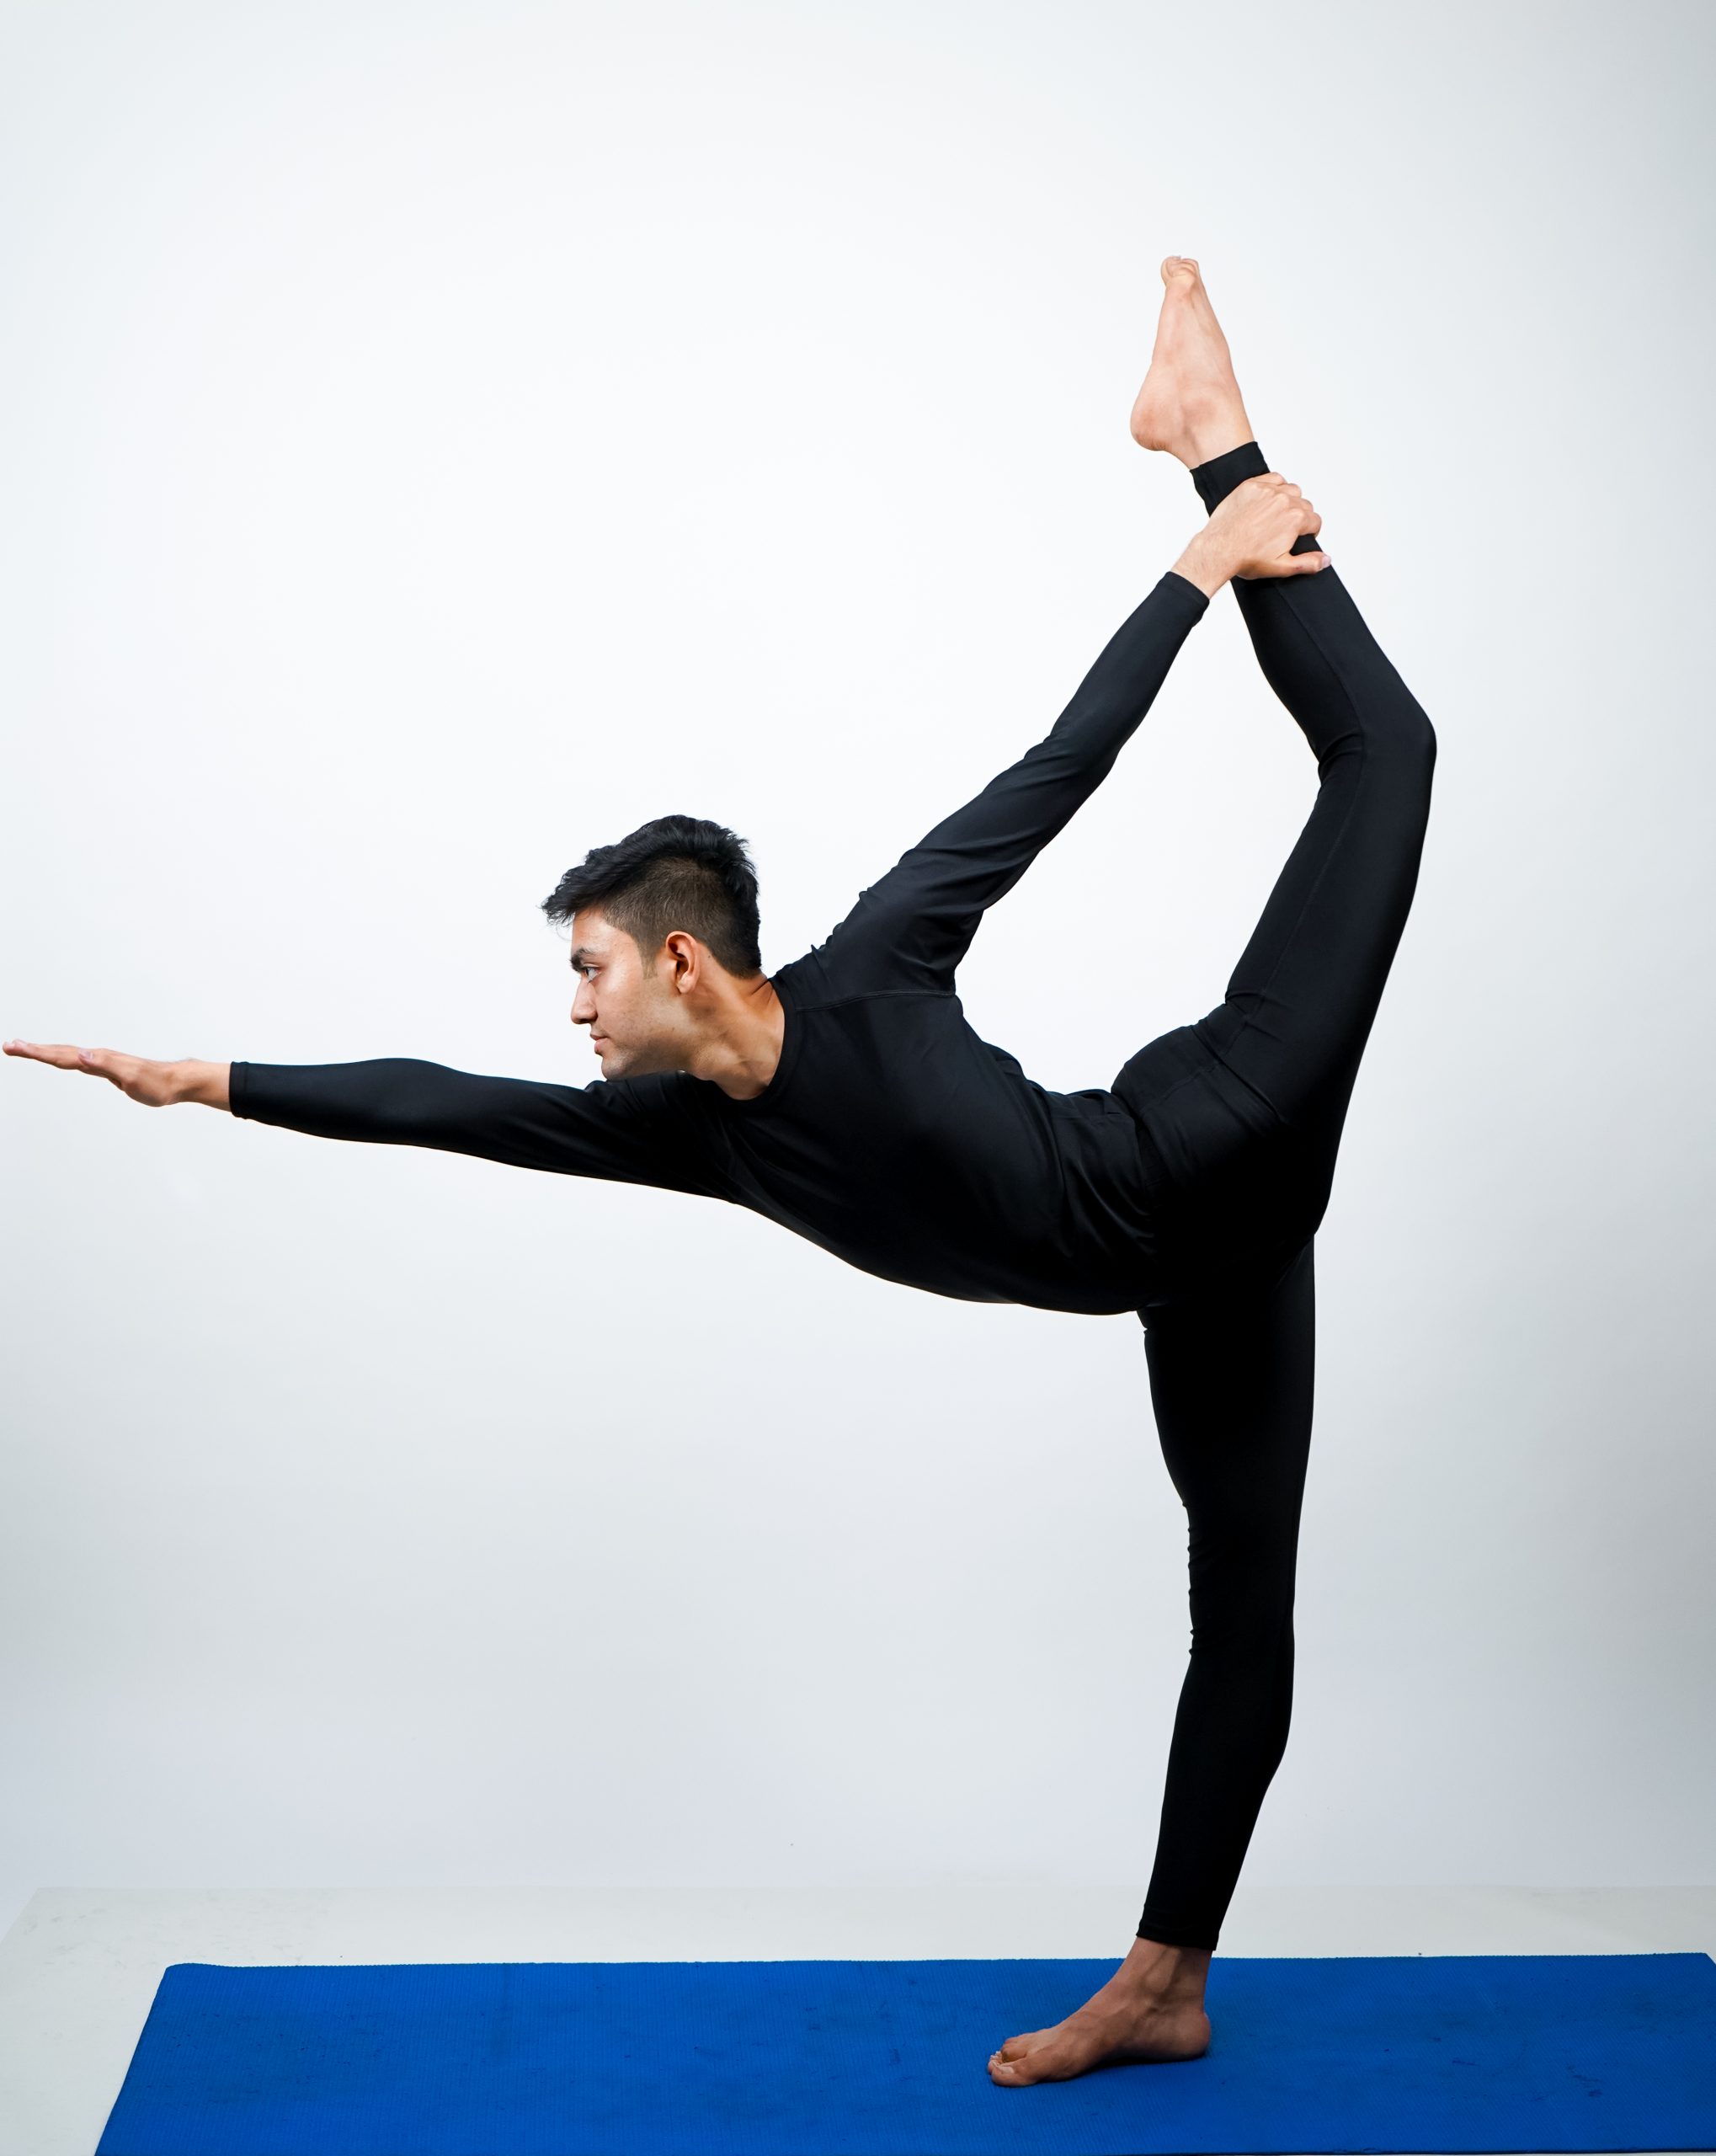 A person in Natarajasana, with arms and leg outstretched, performing a yoga pose